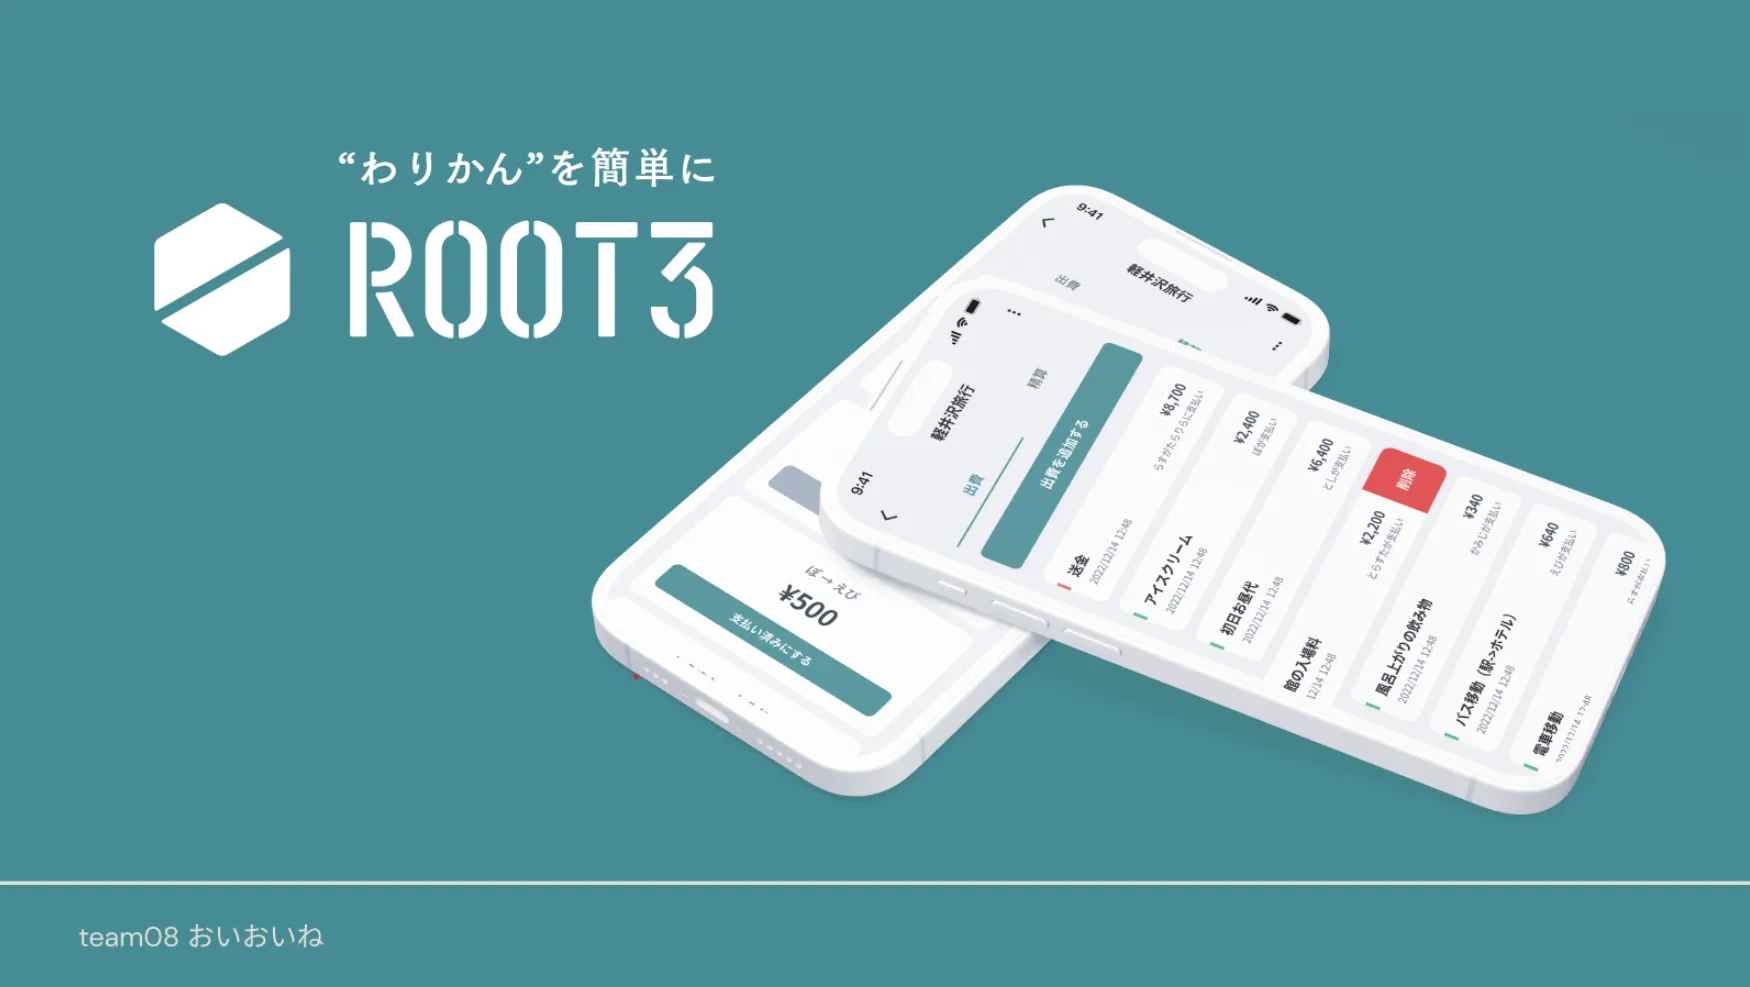 ROOT3